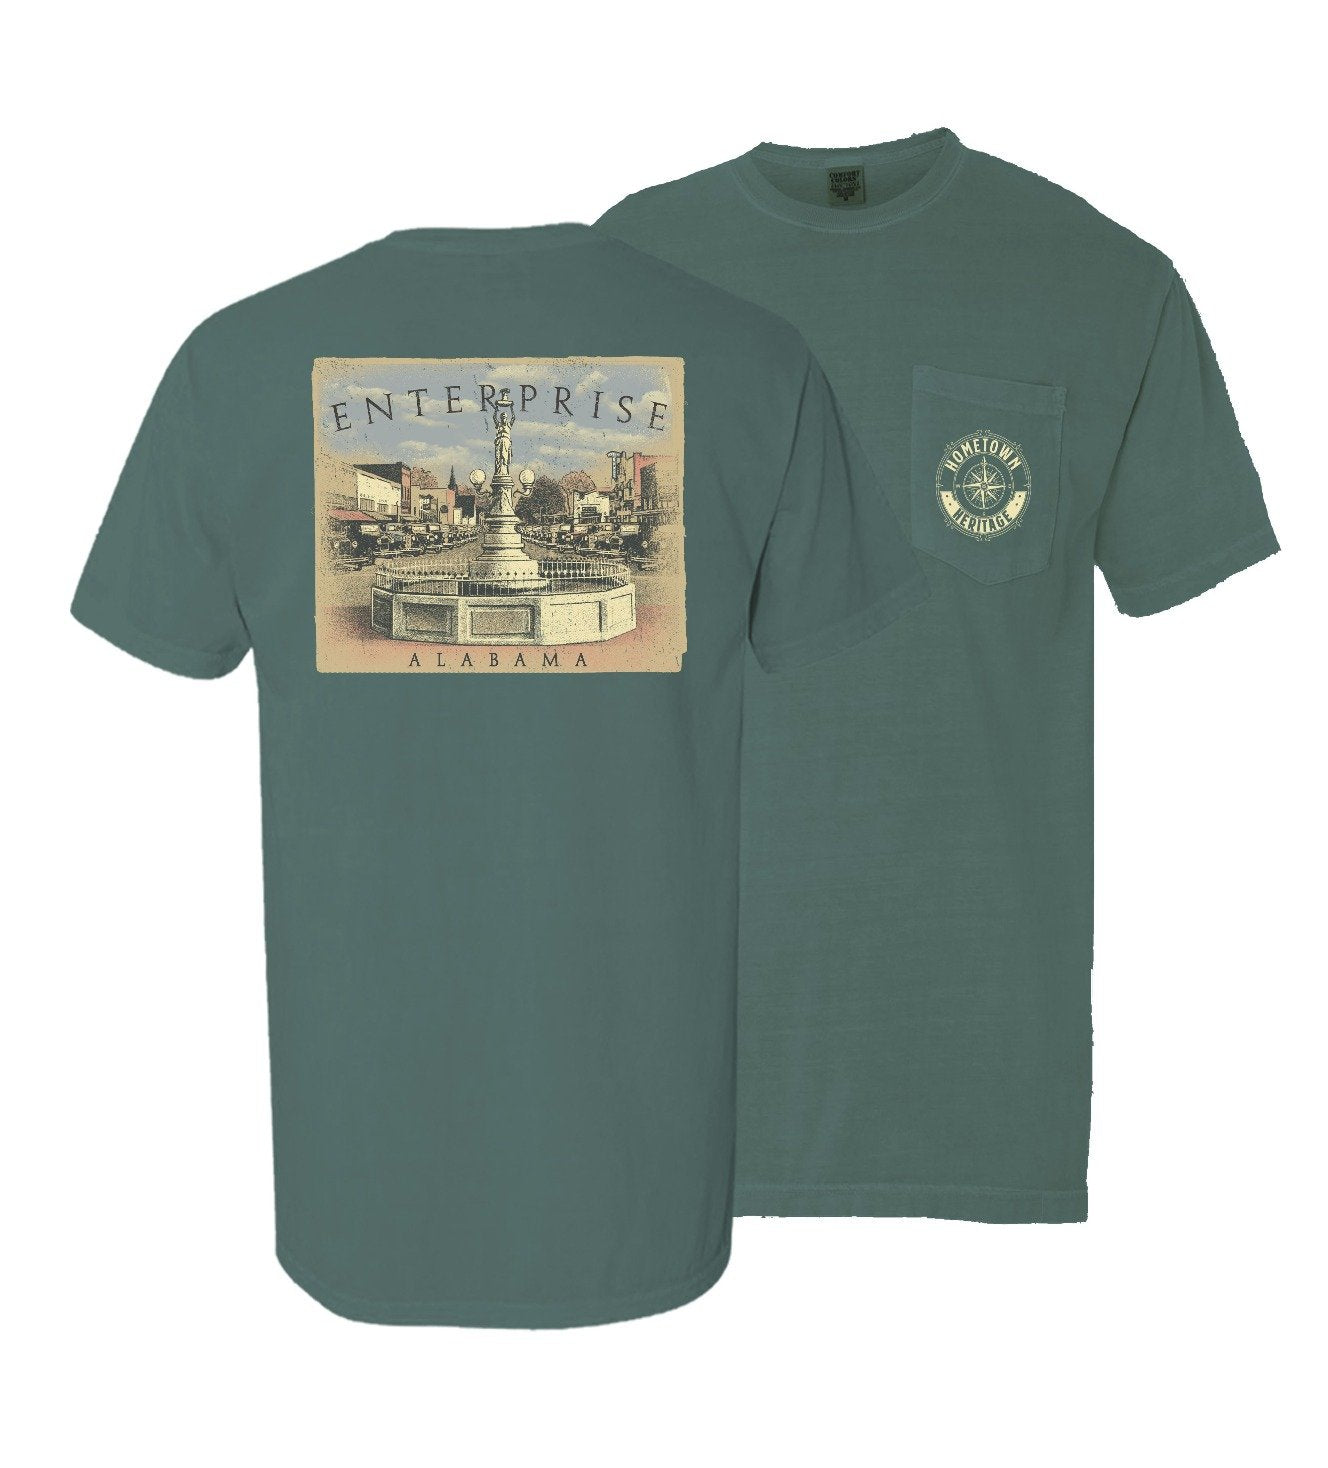 Boll Weevil Statue Enterprise, Alabama T-Shirt by Hometown Heritage ...